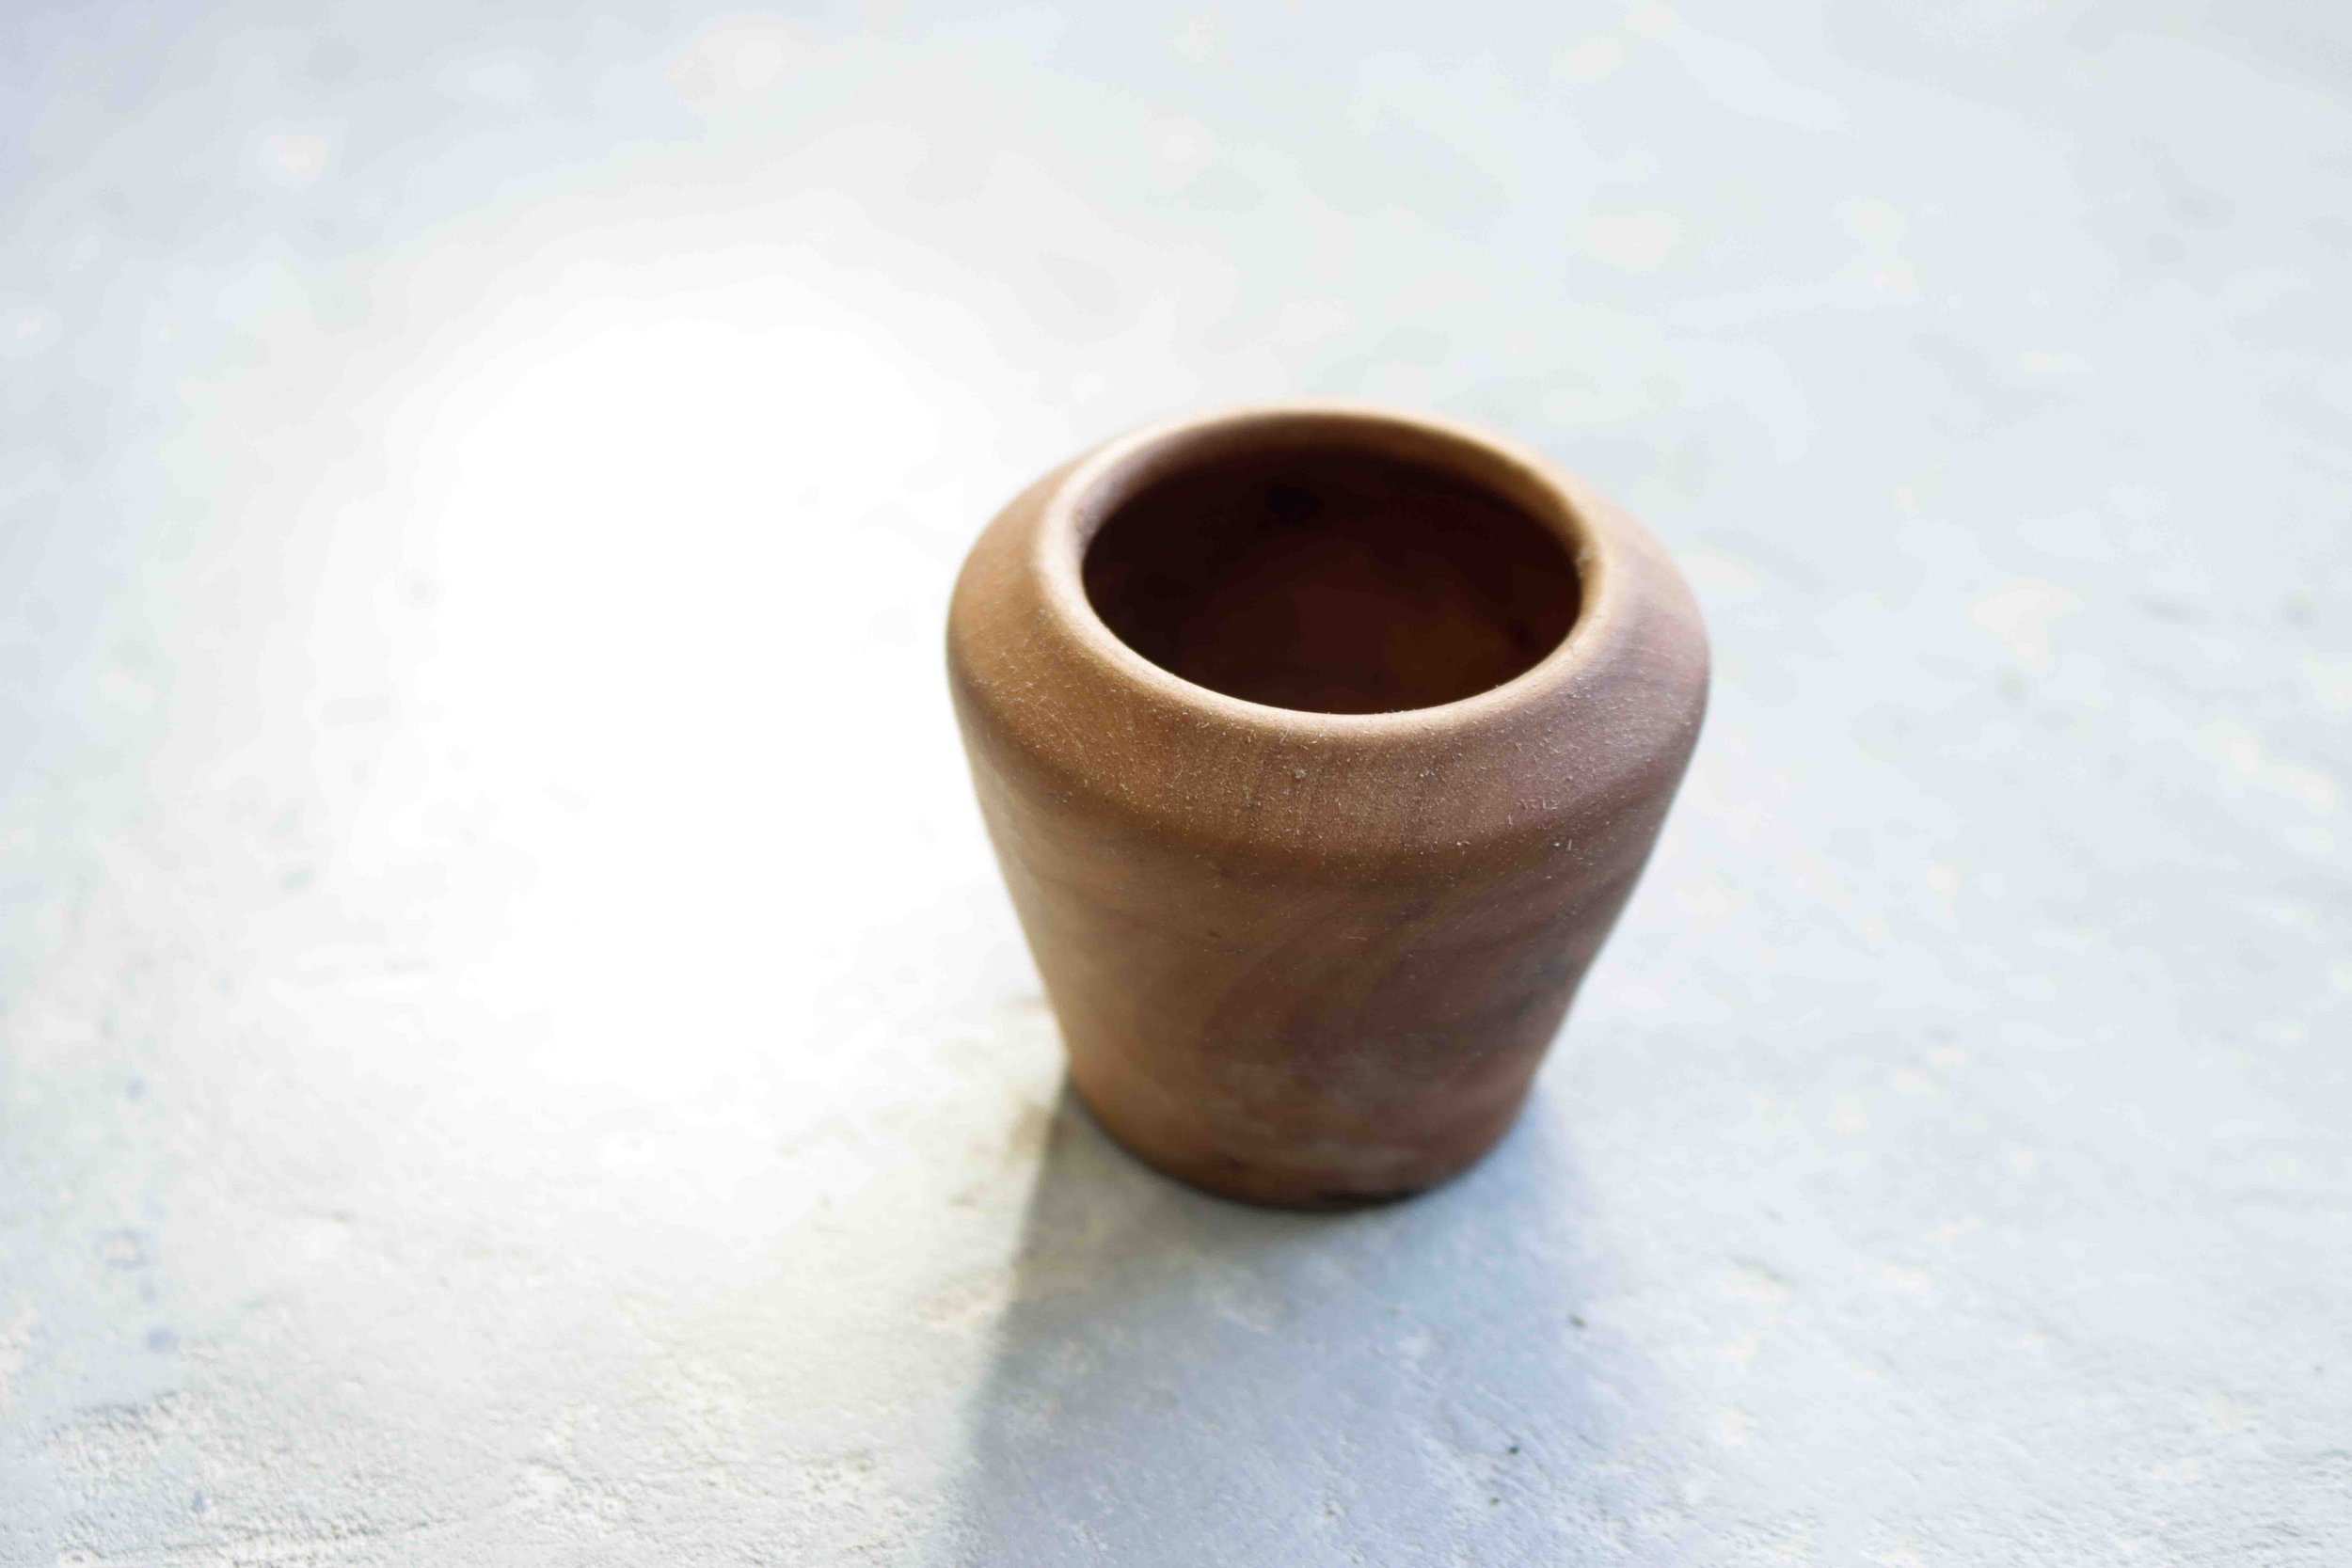 Small wooden vase turned on the lathe (Copy) (Copy) (Copy) (Copy) (Copy) (Copy) (Copy) (Copy)